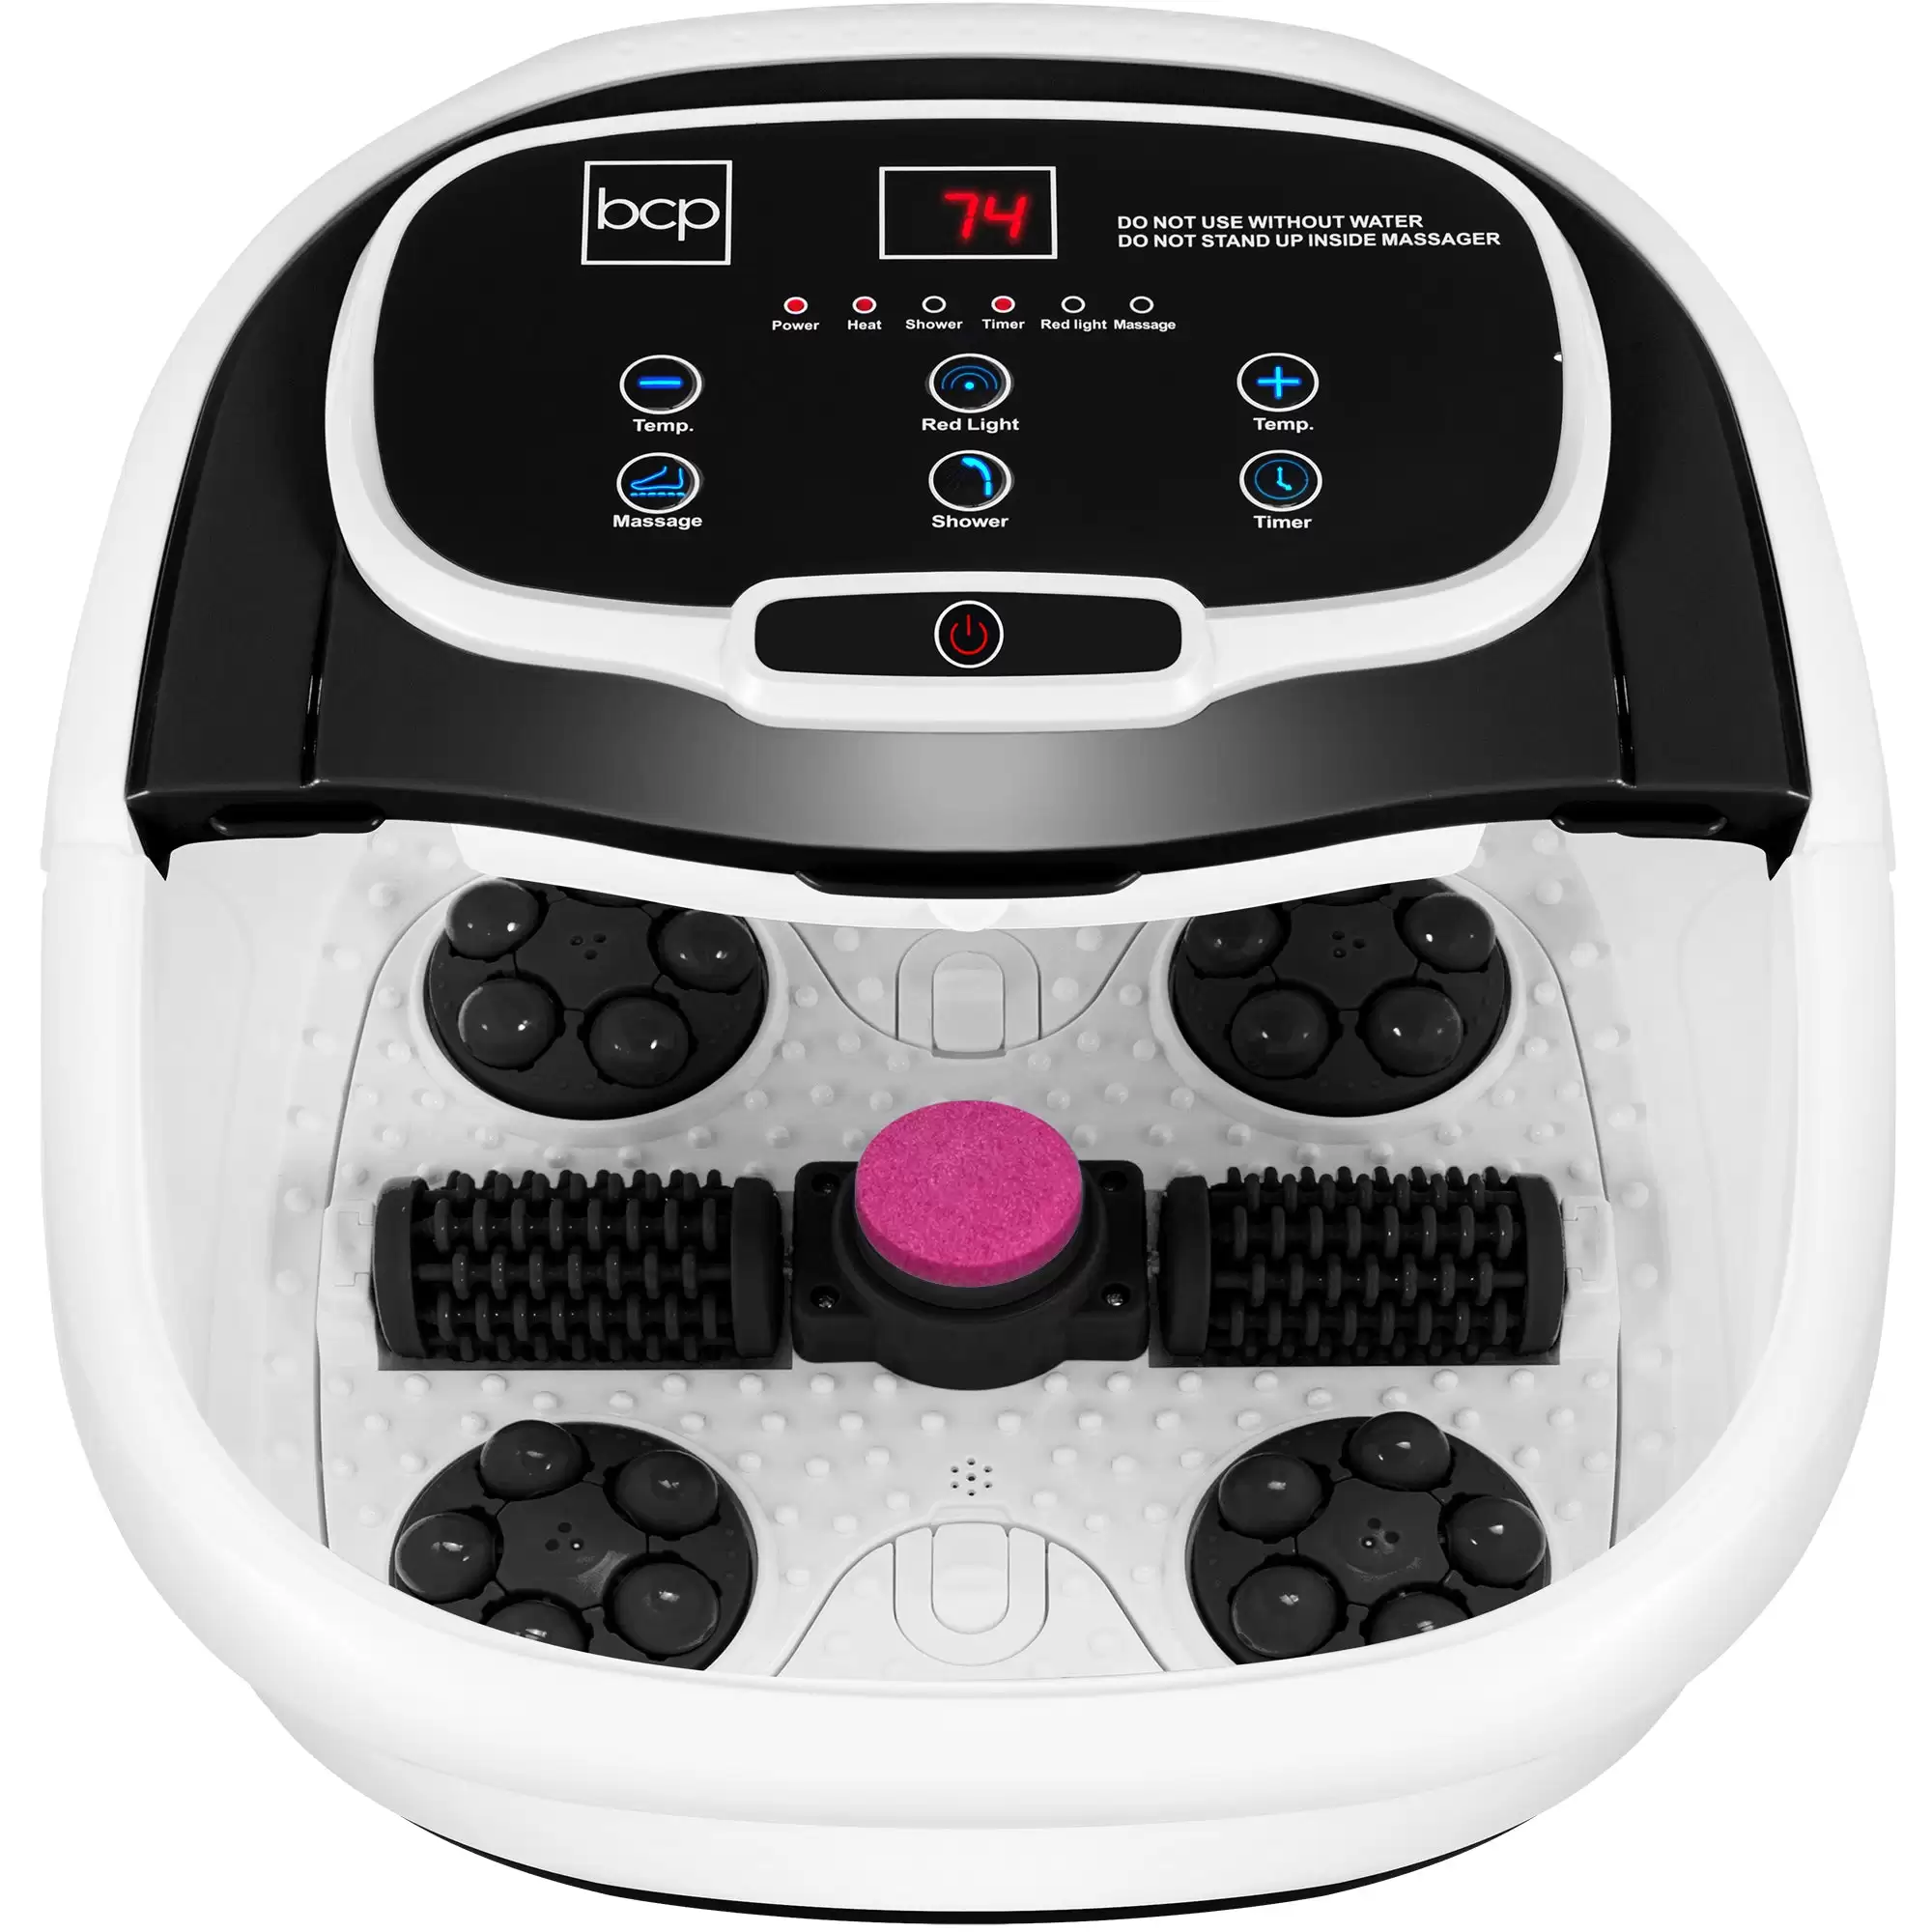 Pay $49.99 Automatic Heated Shiatsu Massage Foot Bath Spa W/ Pumice Stone - Bcpmassage With This Bestchoiceproducts Discount Voucher